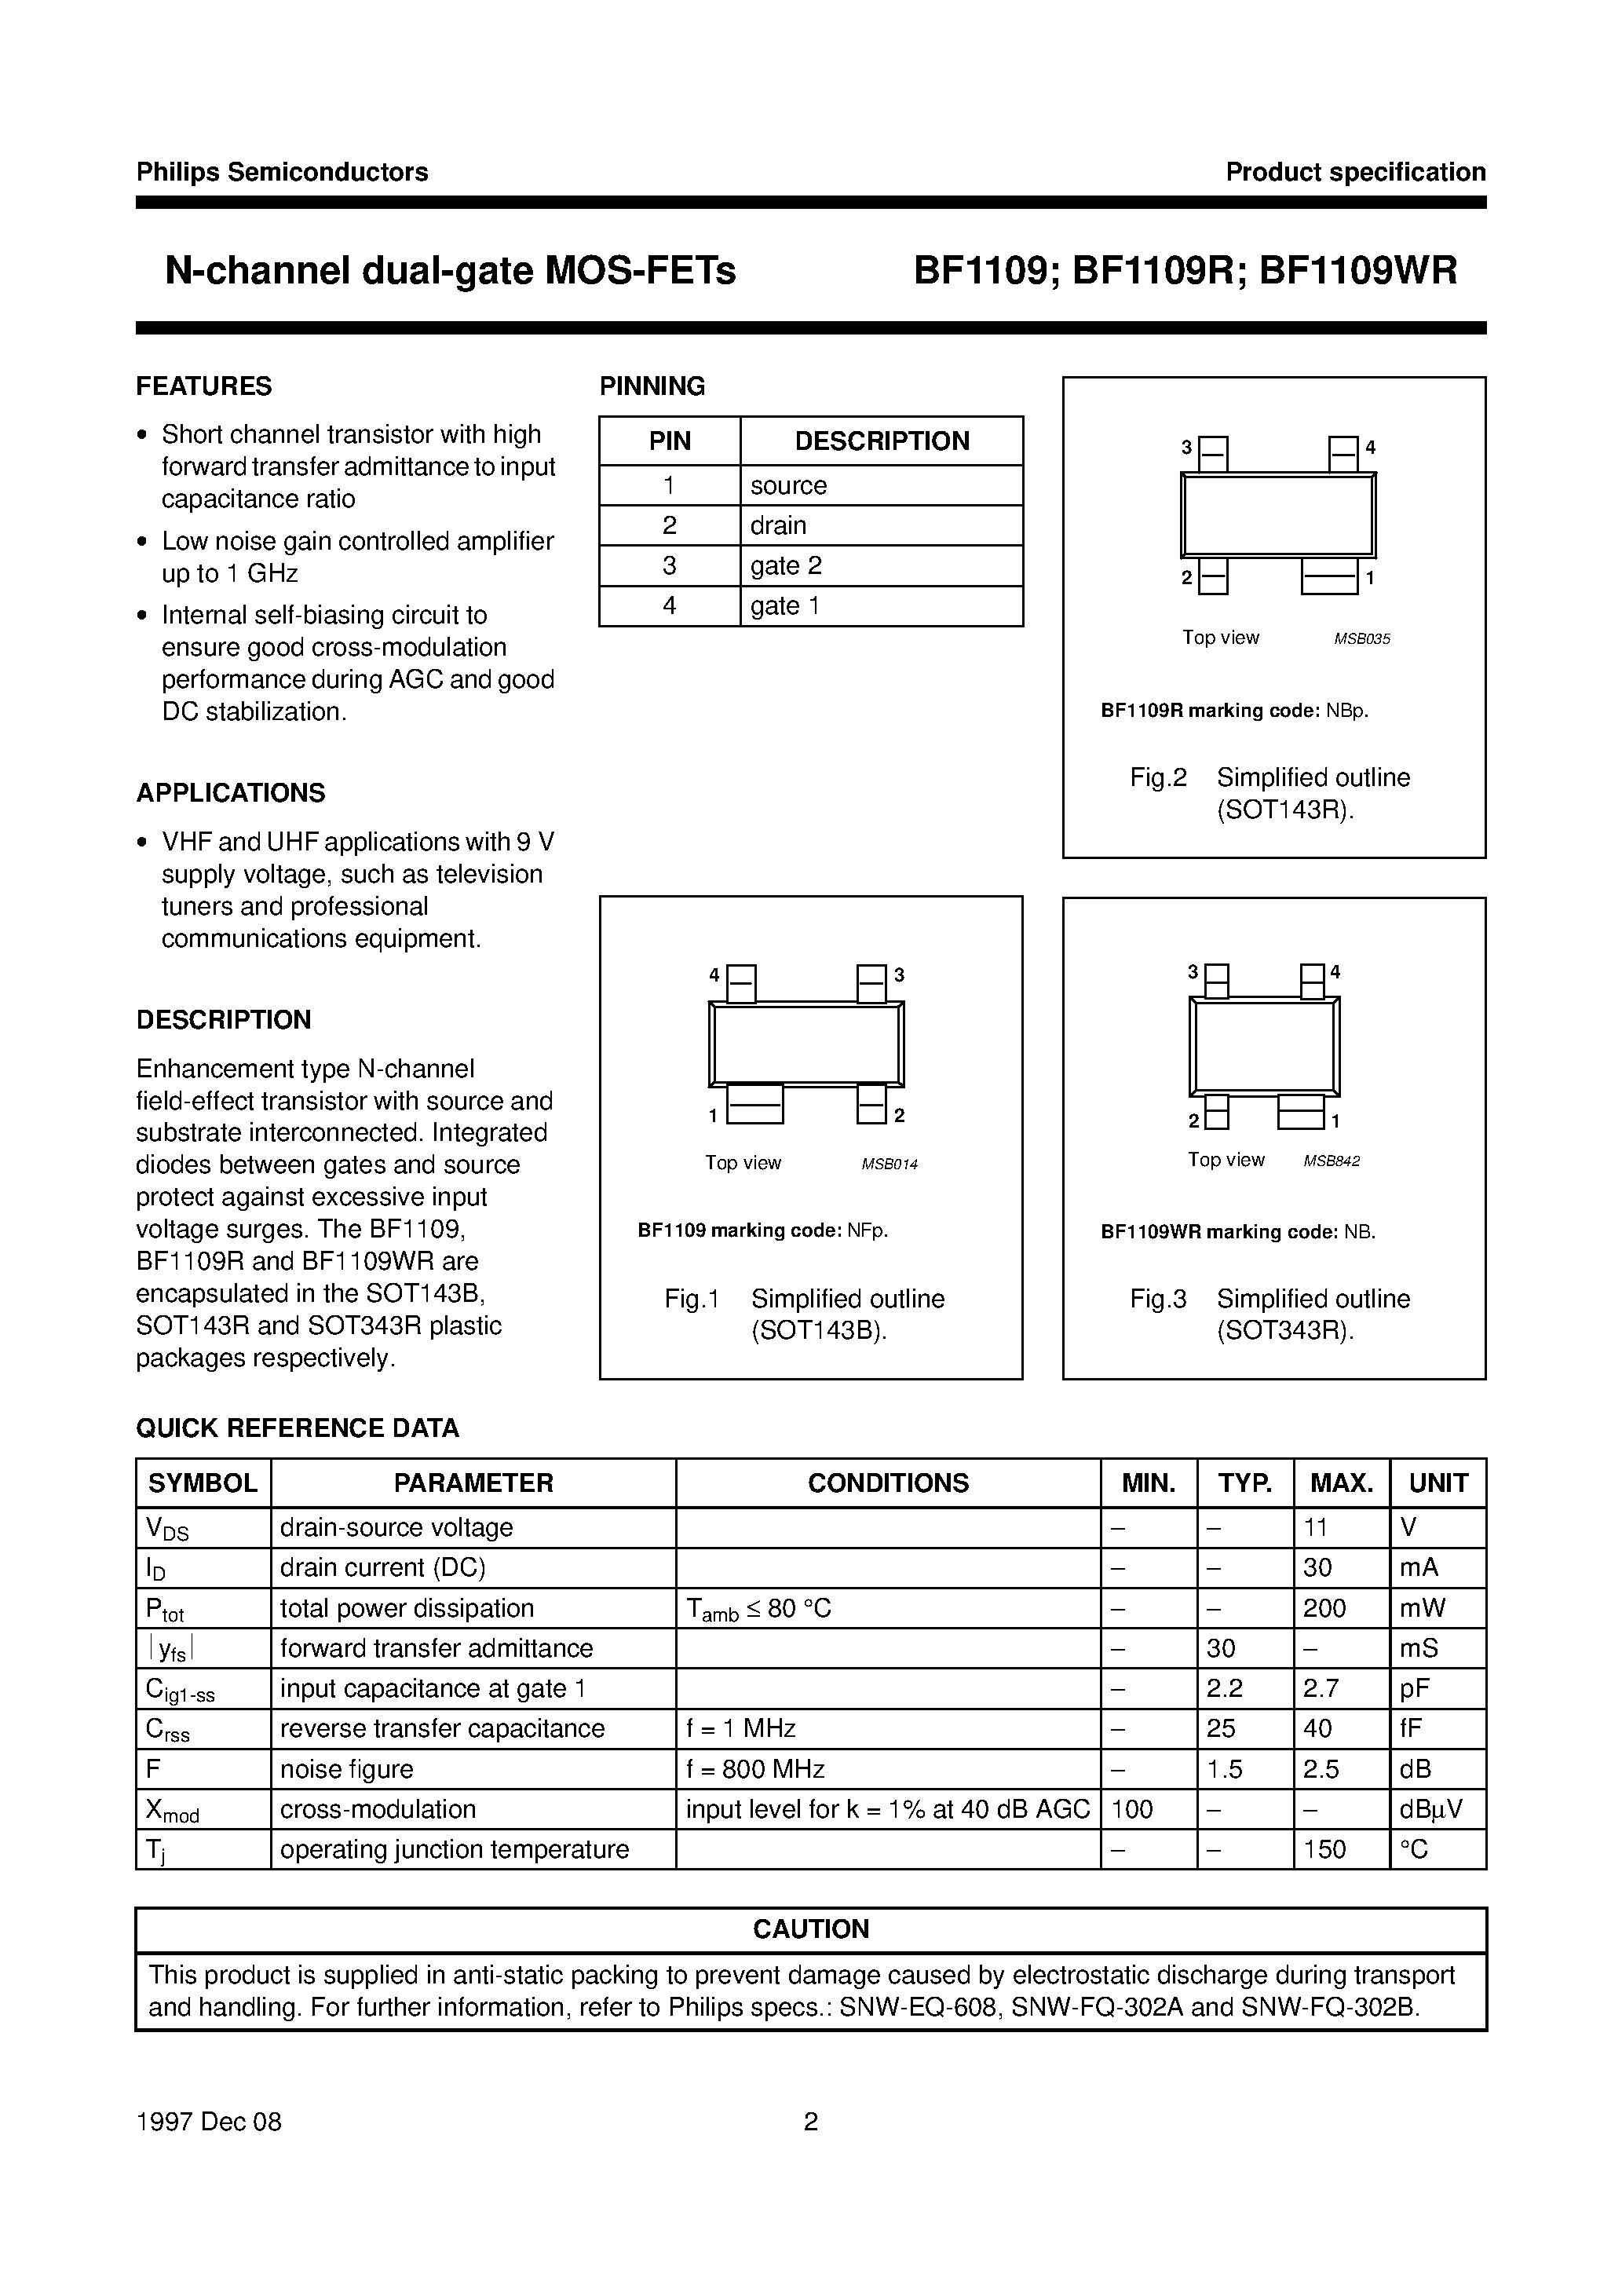 Datasheet BF1109WR - N-channel dual-gate MOS-FETs page 2